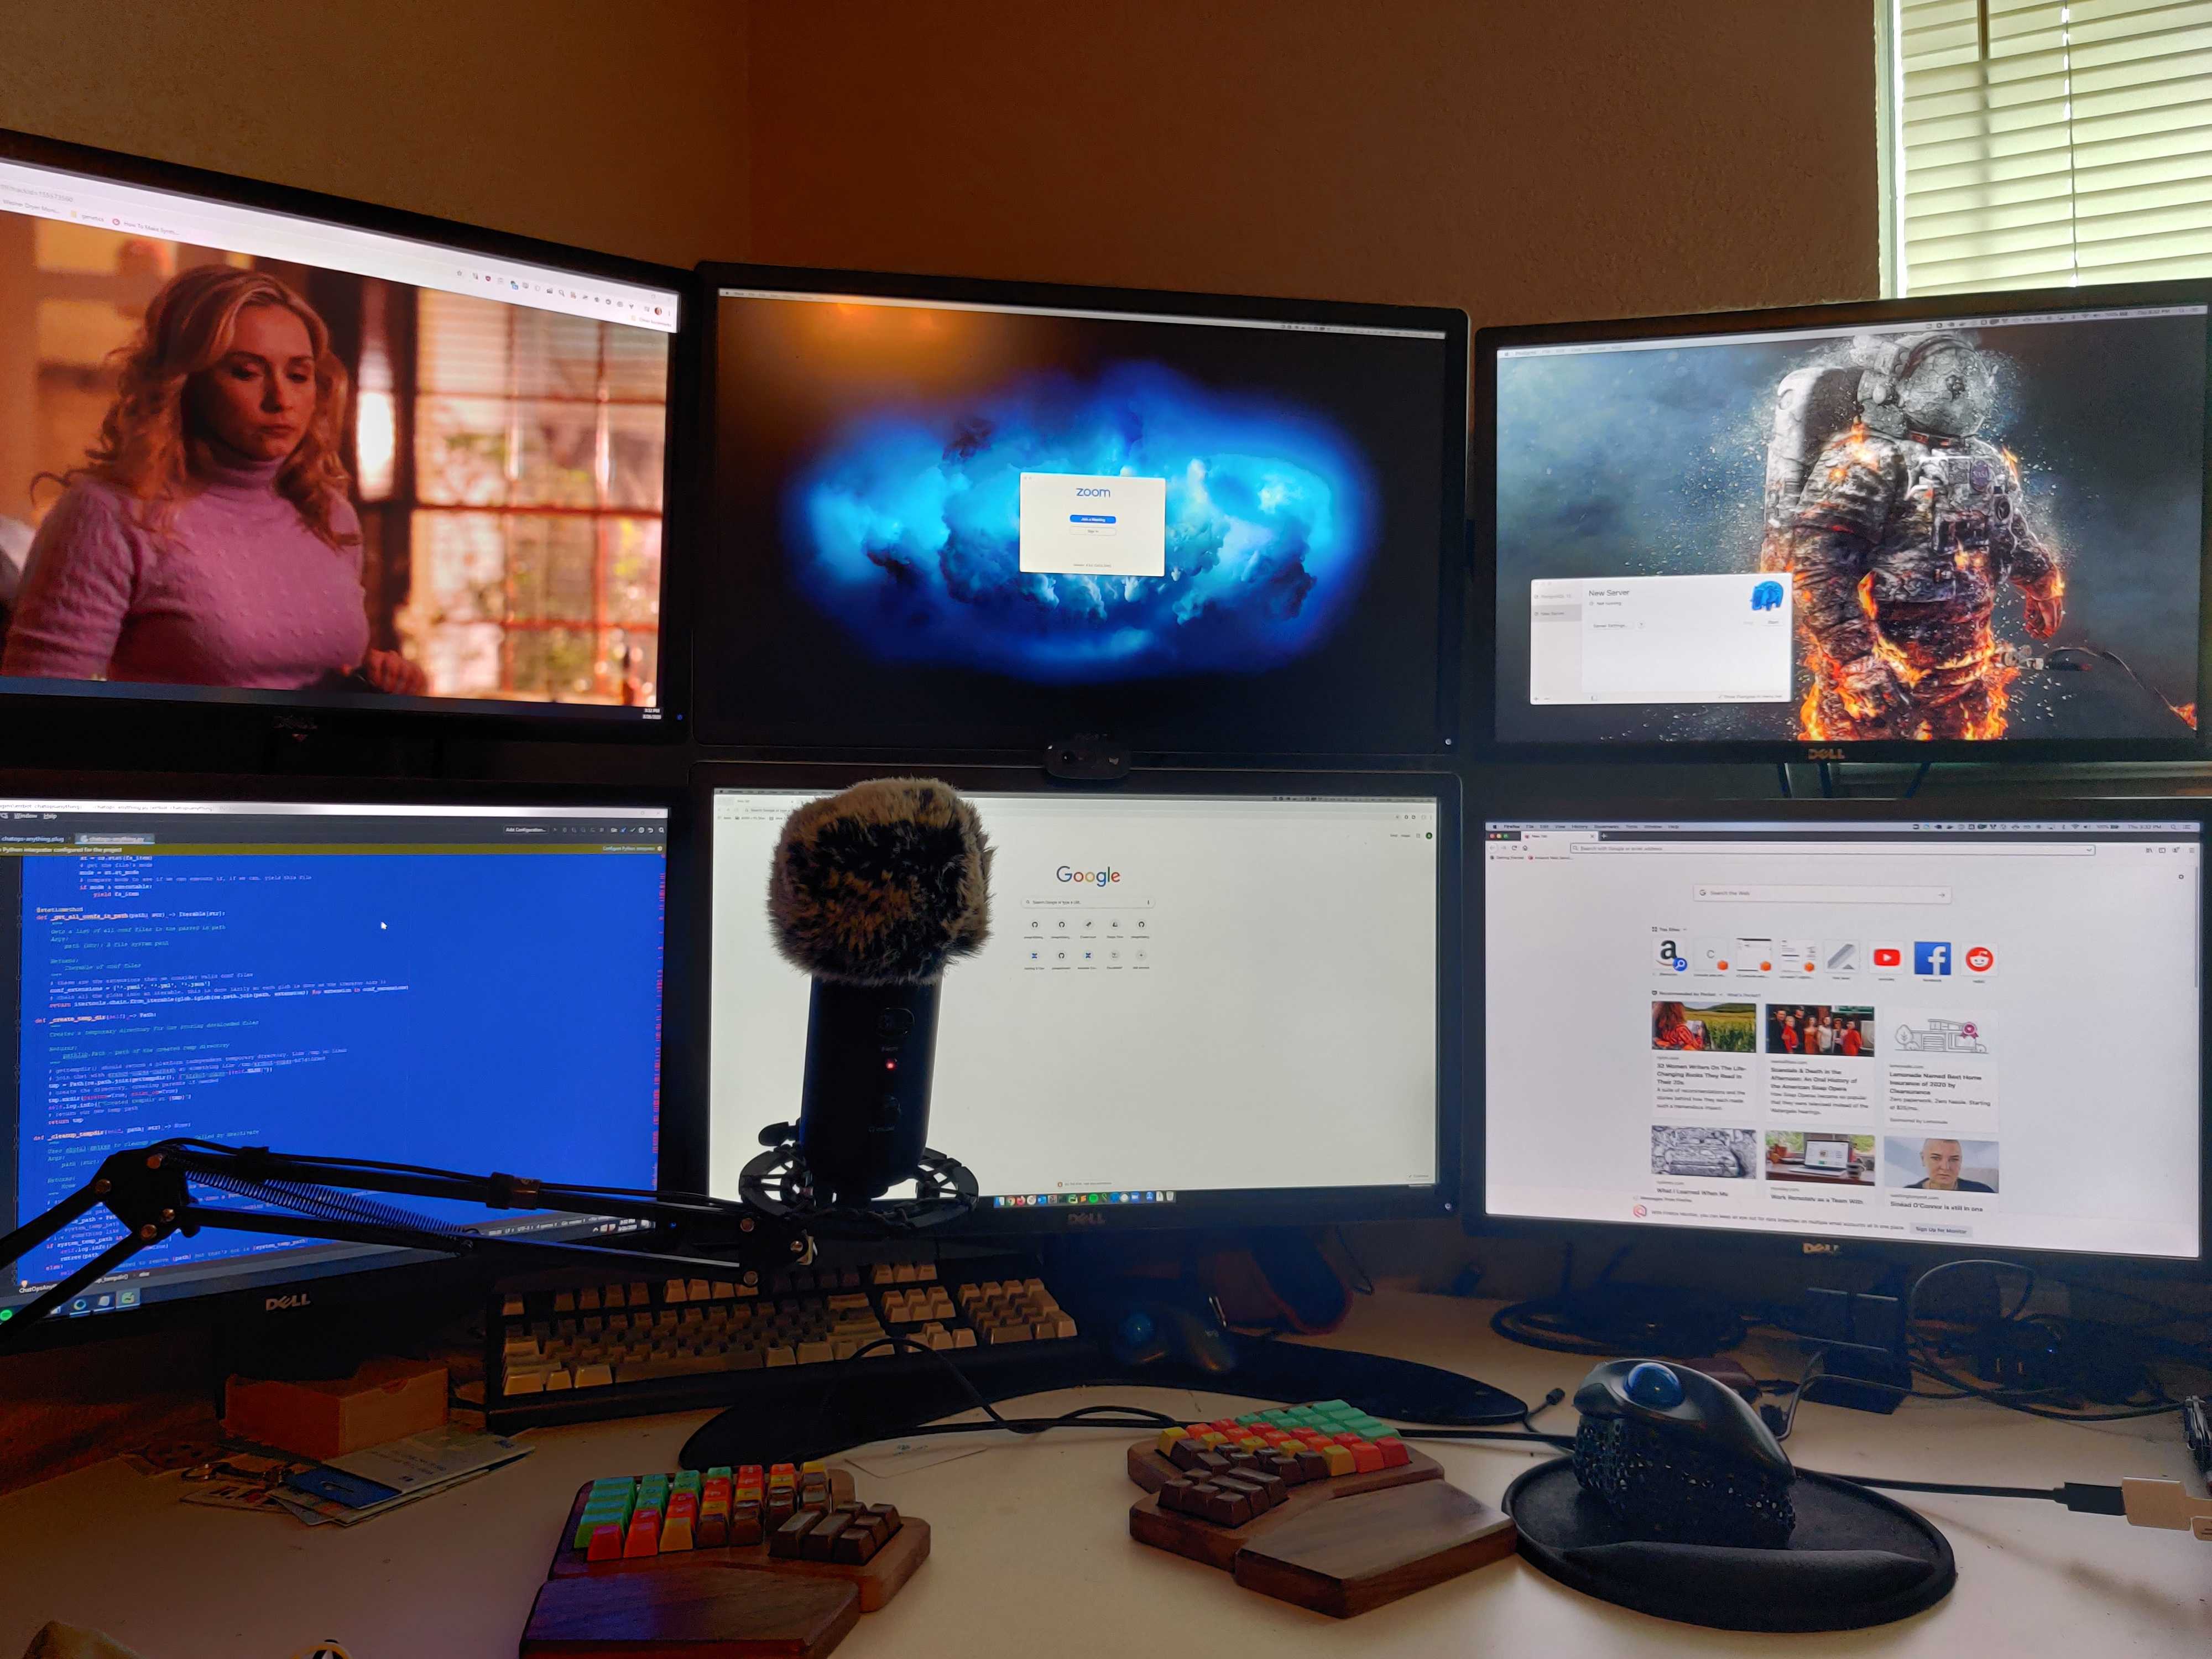 Andrew’s six monitor workstation